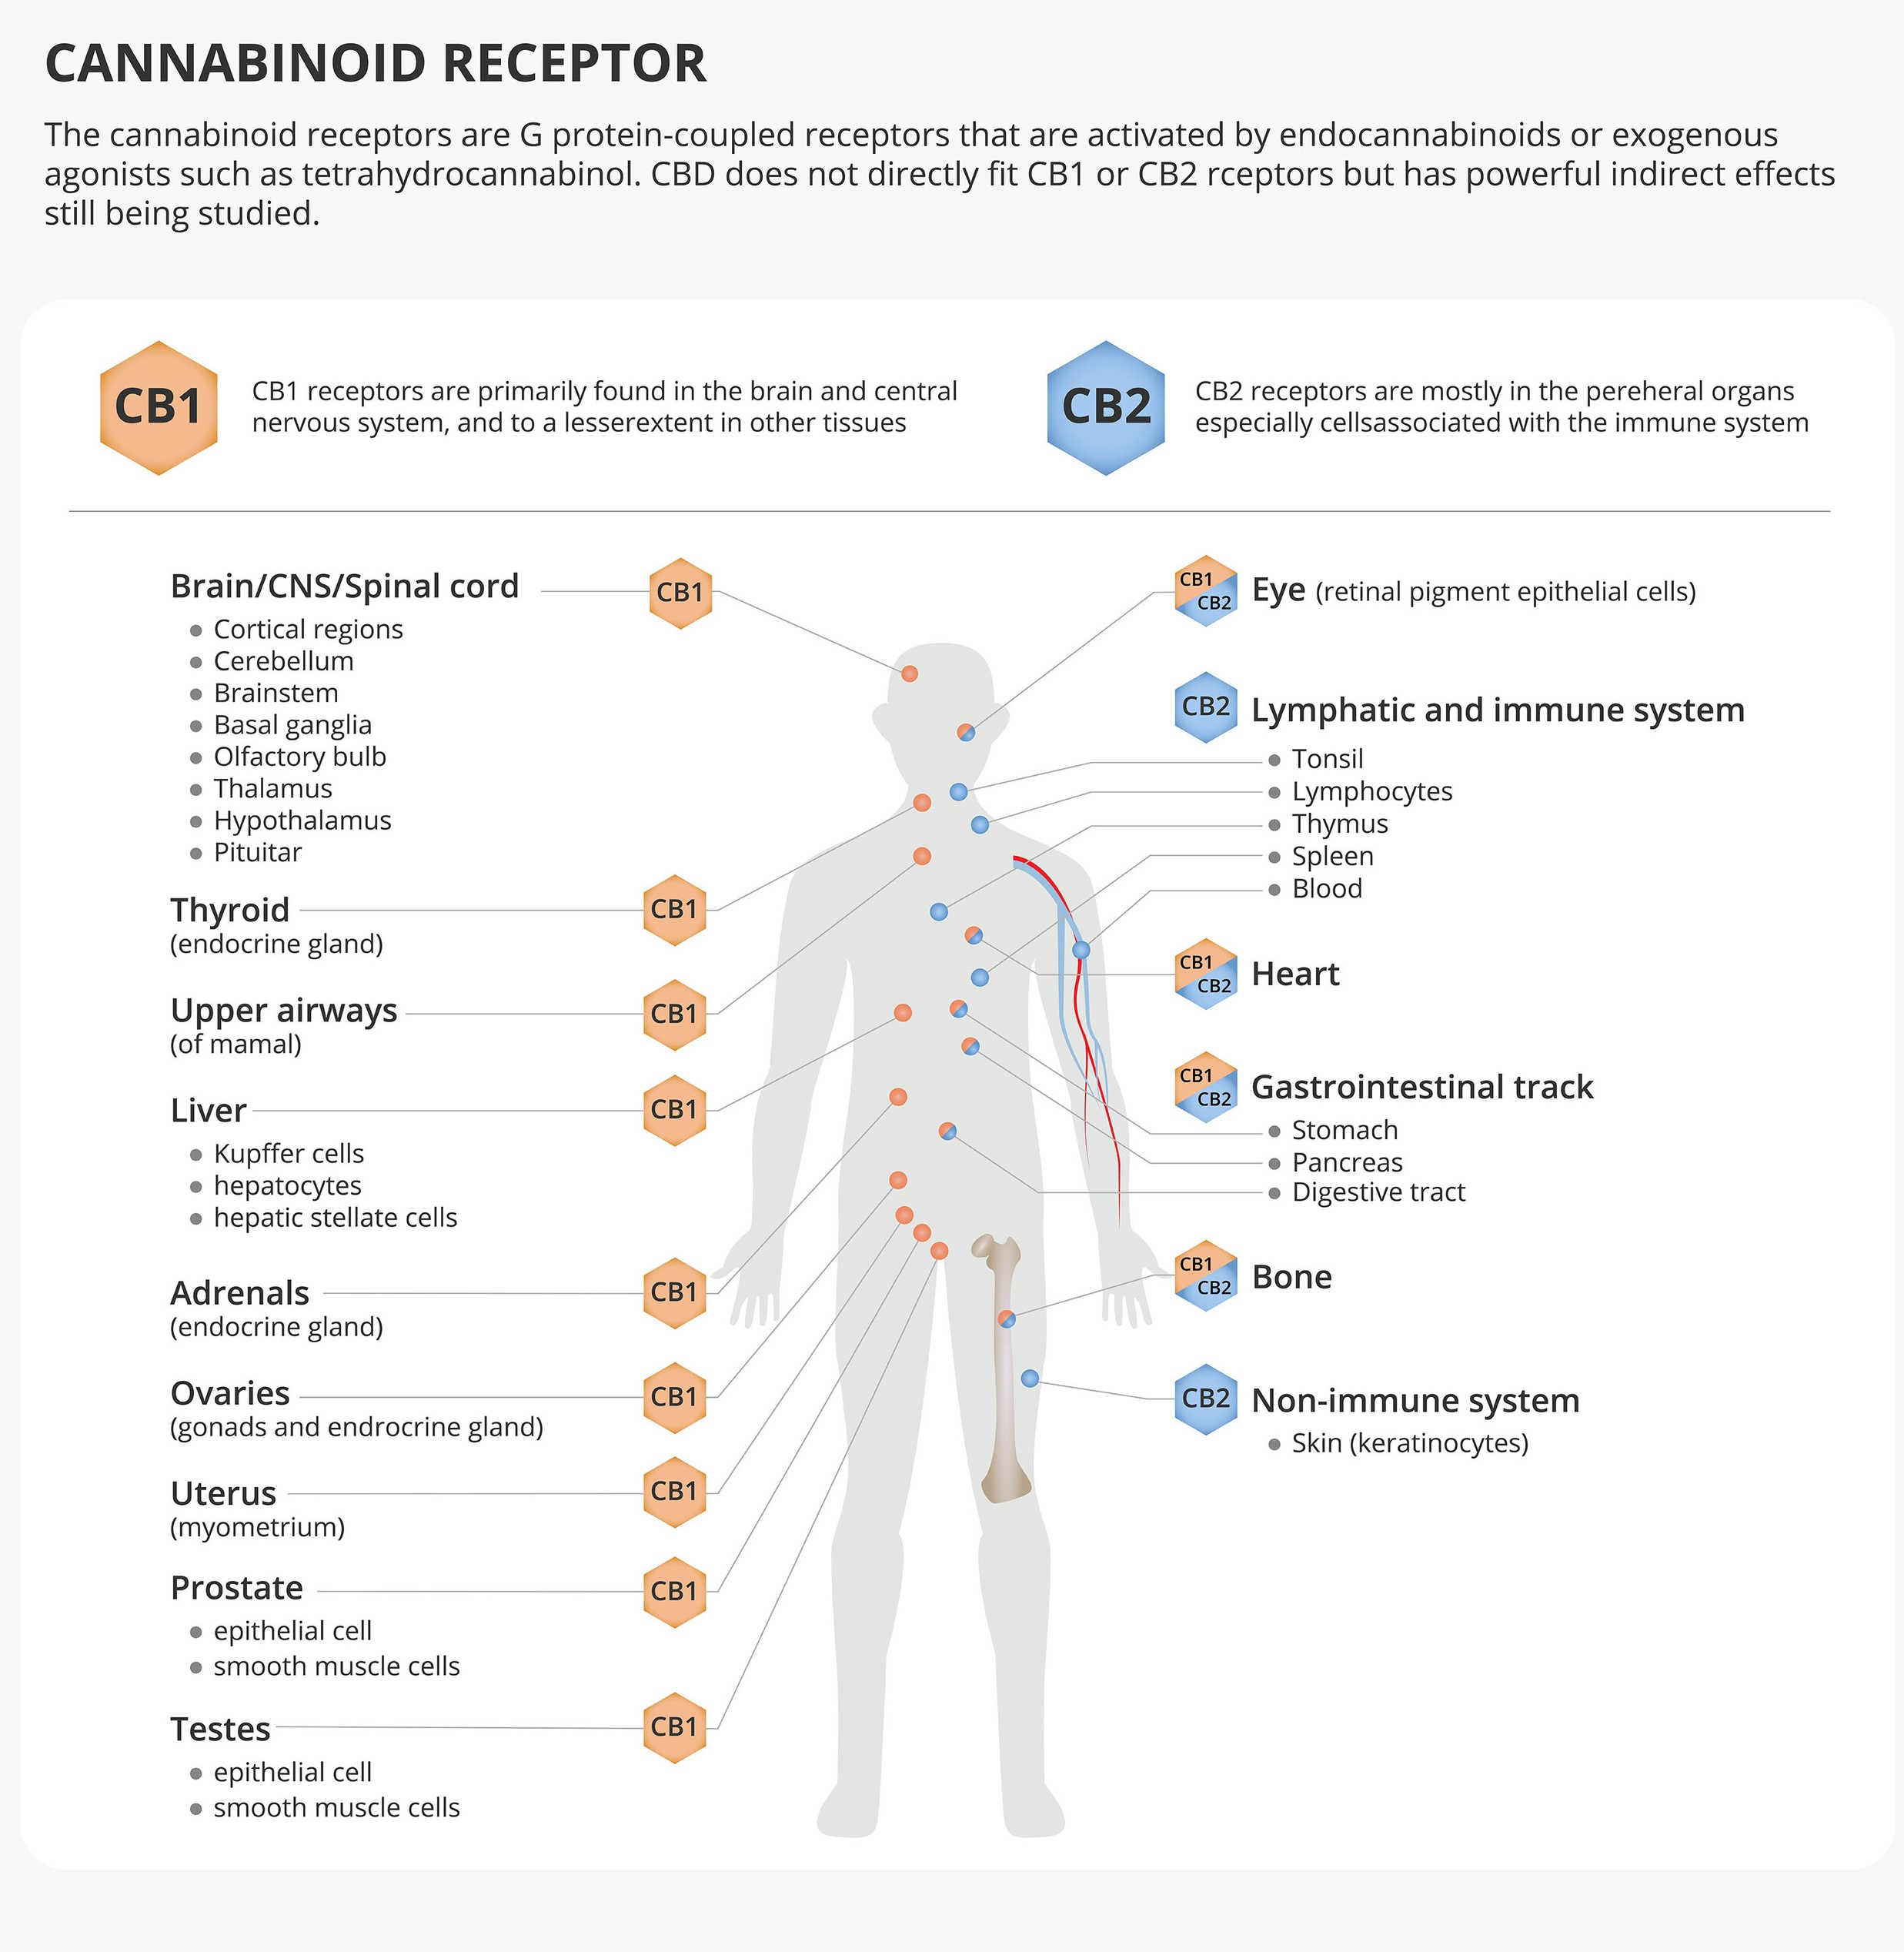 A chart showing where the cannabinoid receptors are in the human body